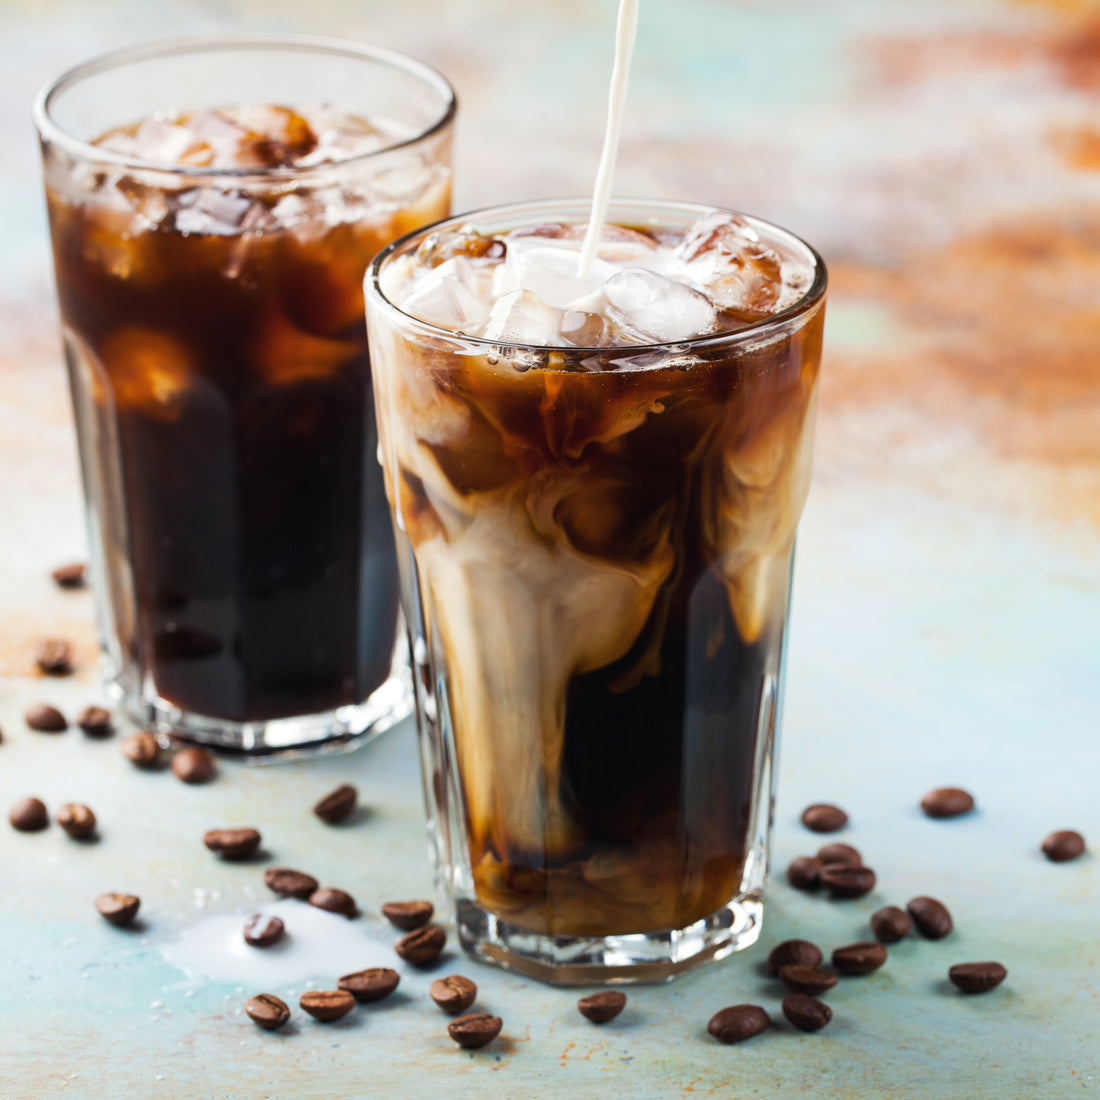 Making the Perfect Iced Coffee at Home